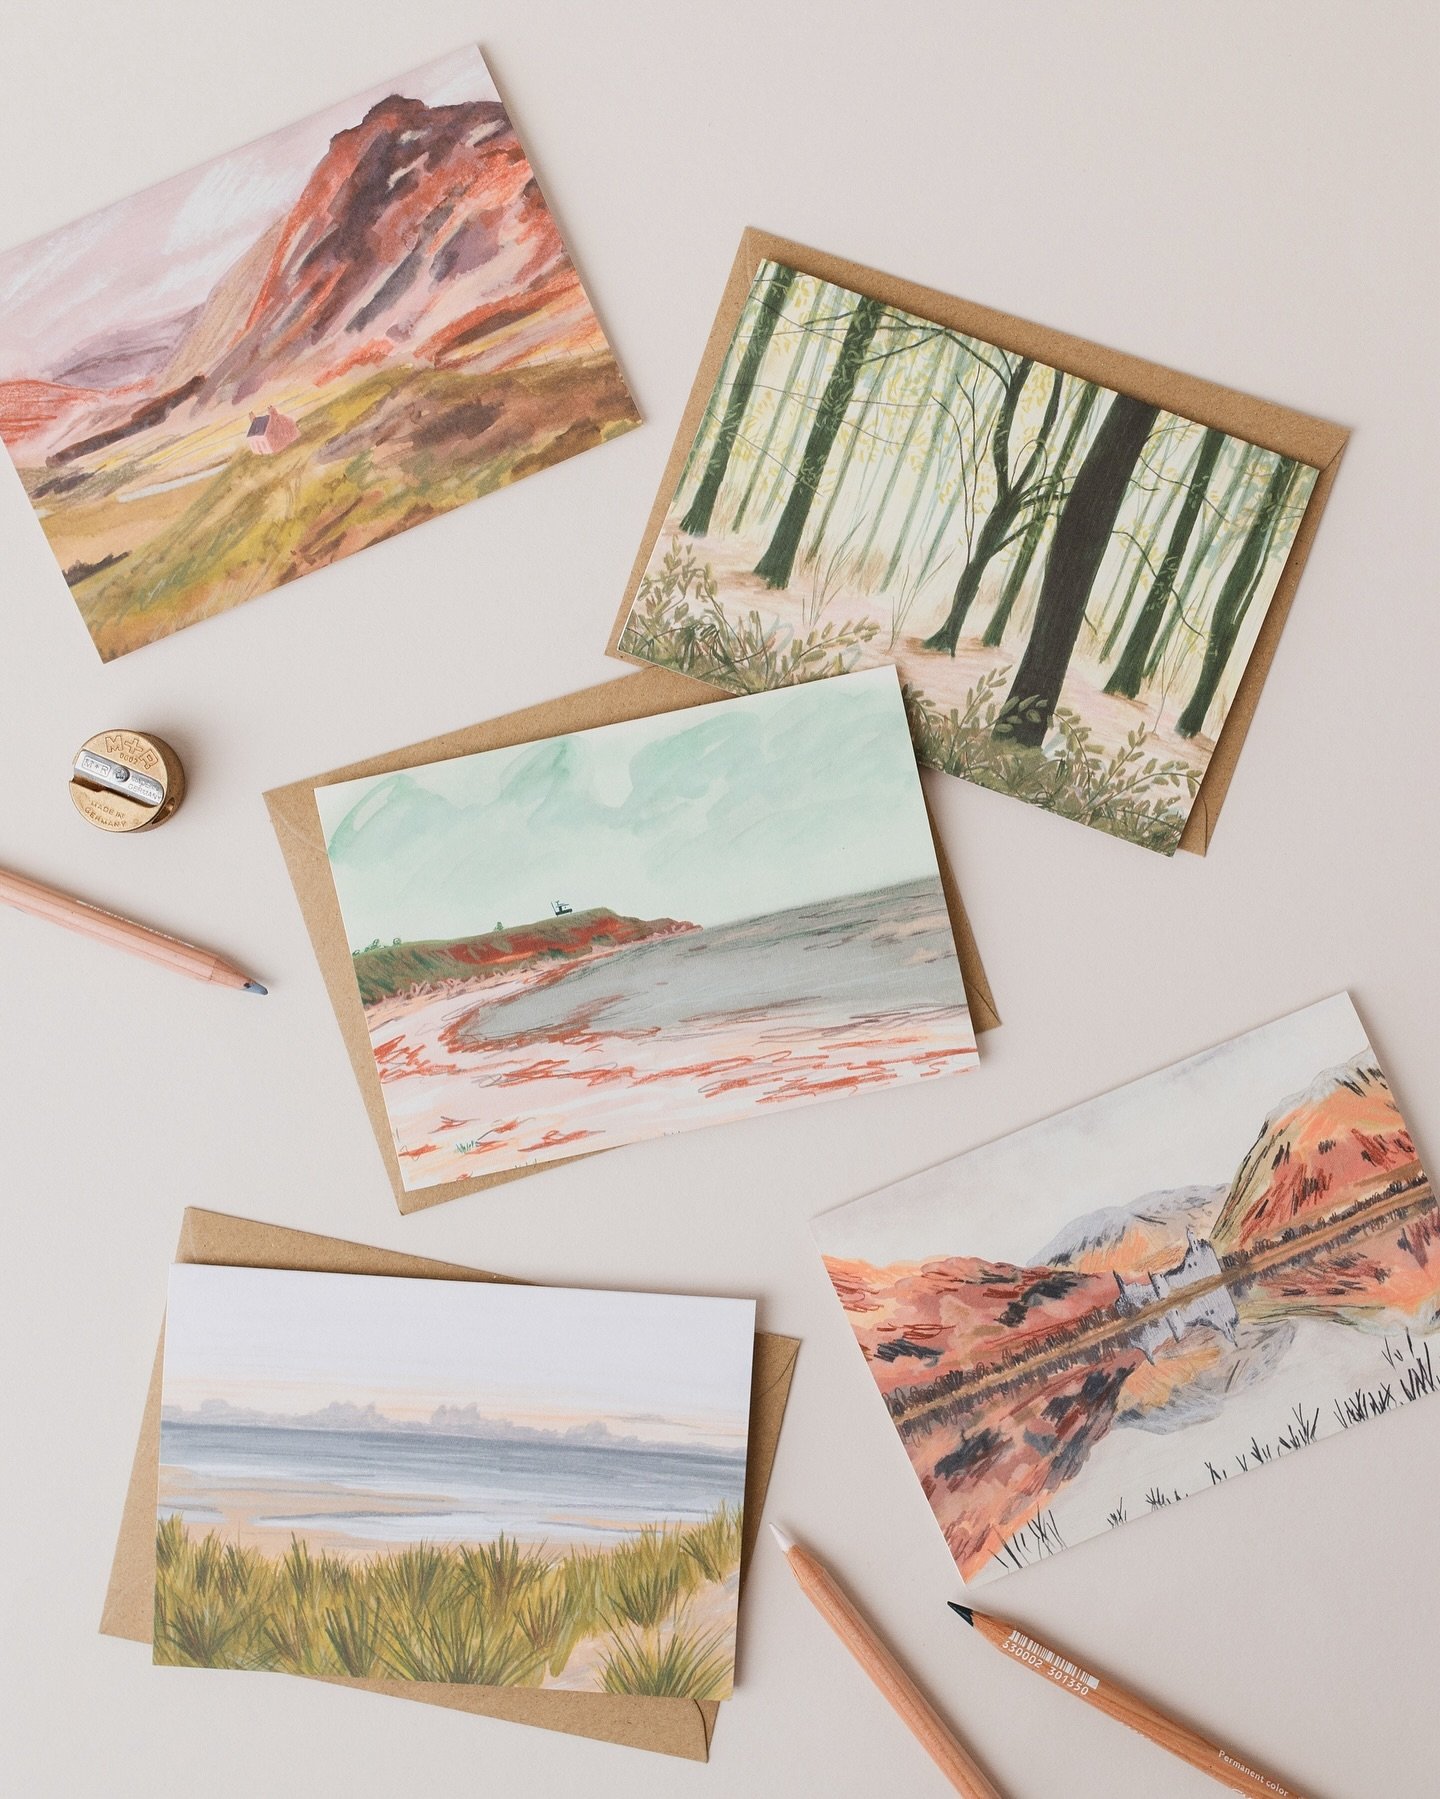 I have a question please!

When you buy a landscape, card or print that features a landscape scene, do you like it to say the location on the back? Or are you just there for the pretty landscape vibes and prefer to project your own associations with 